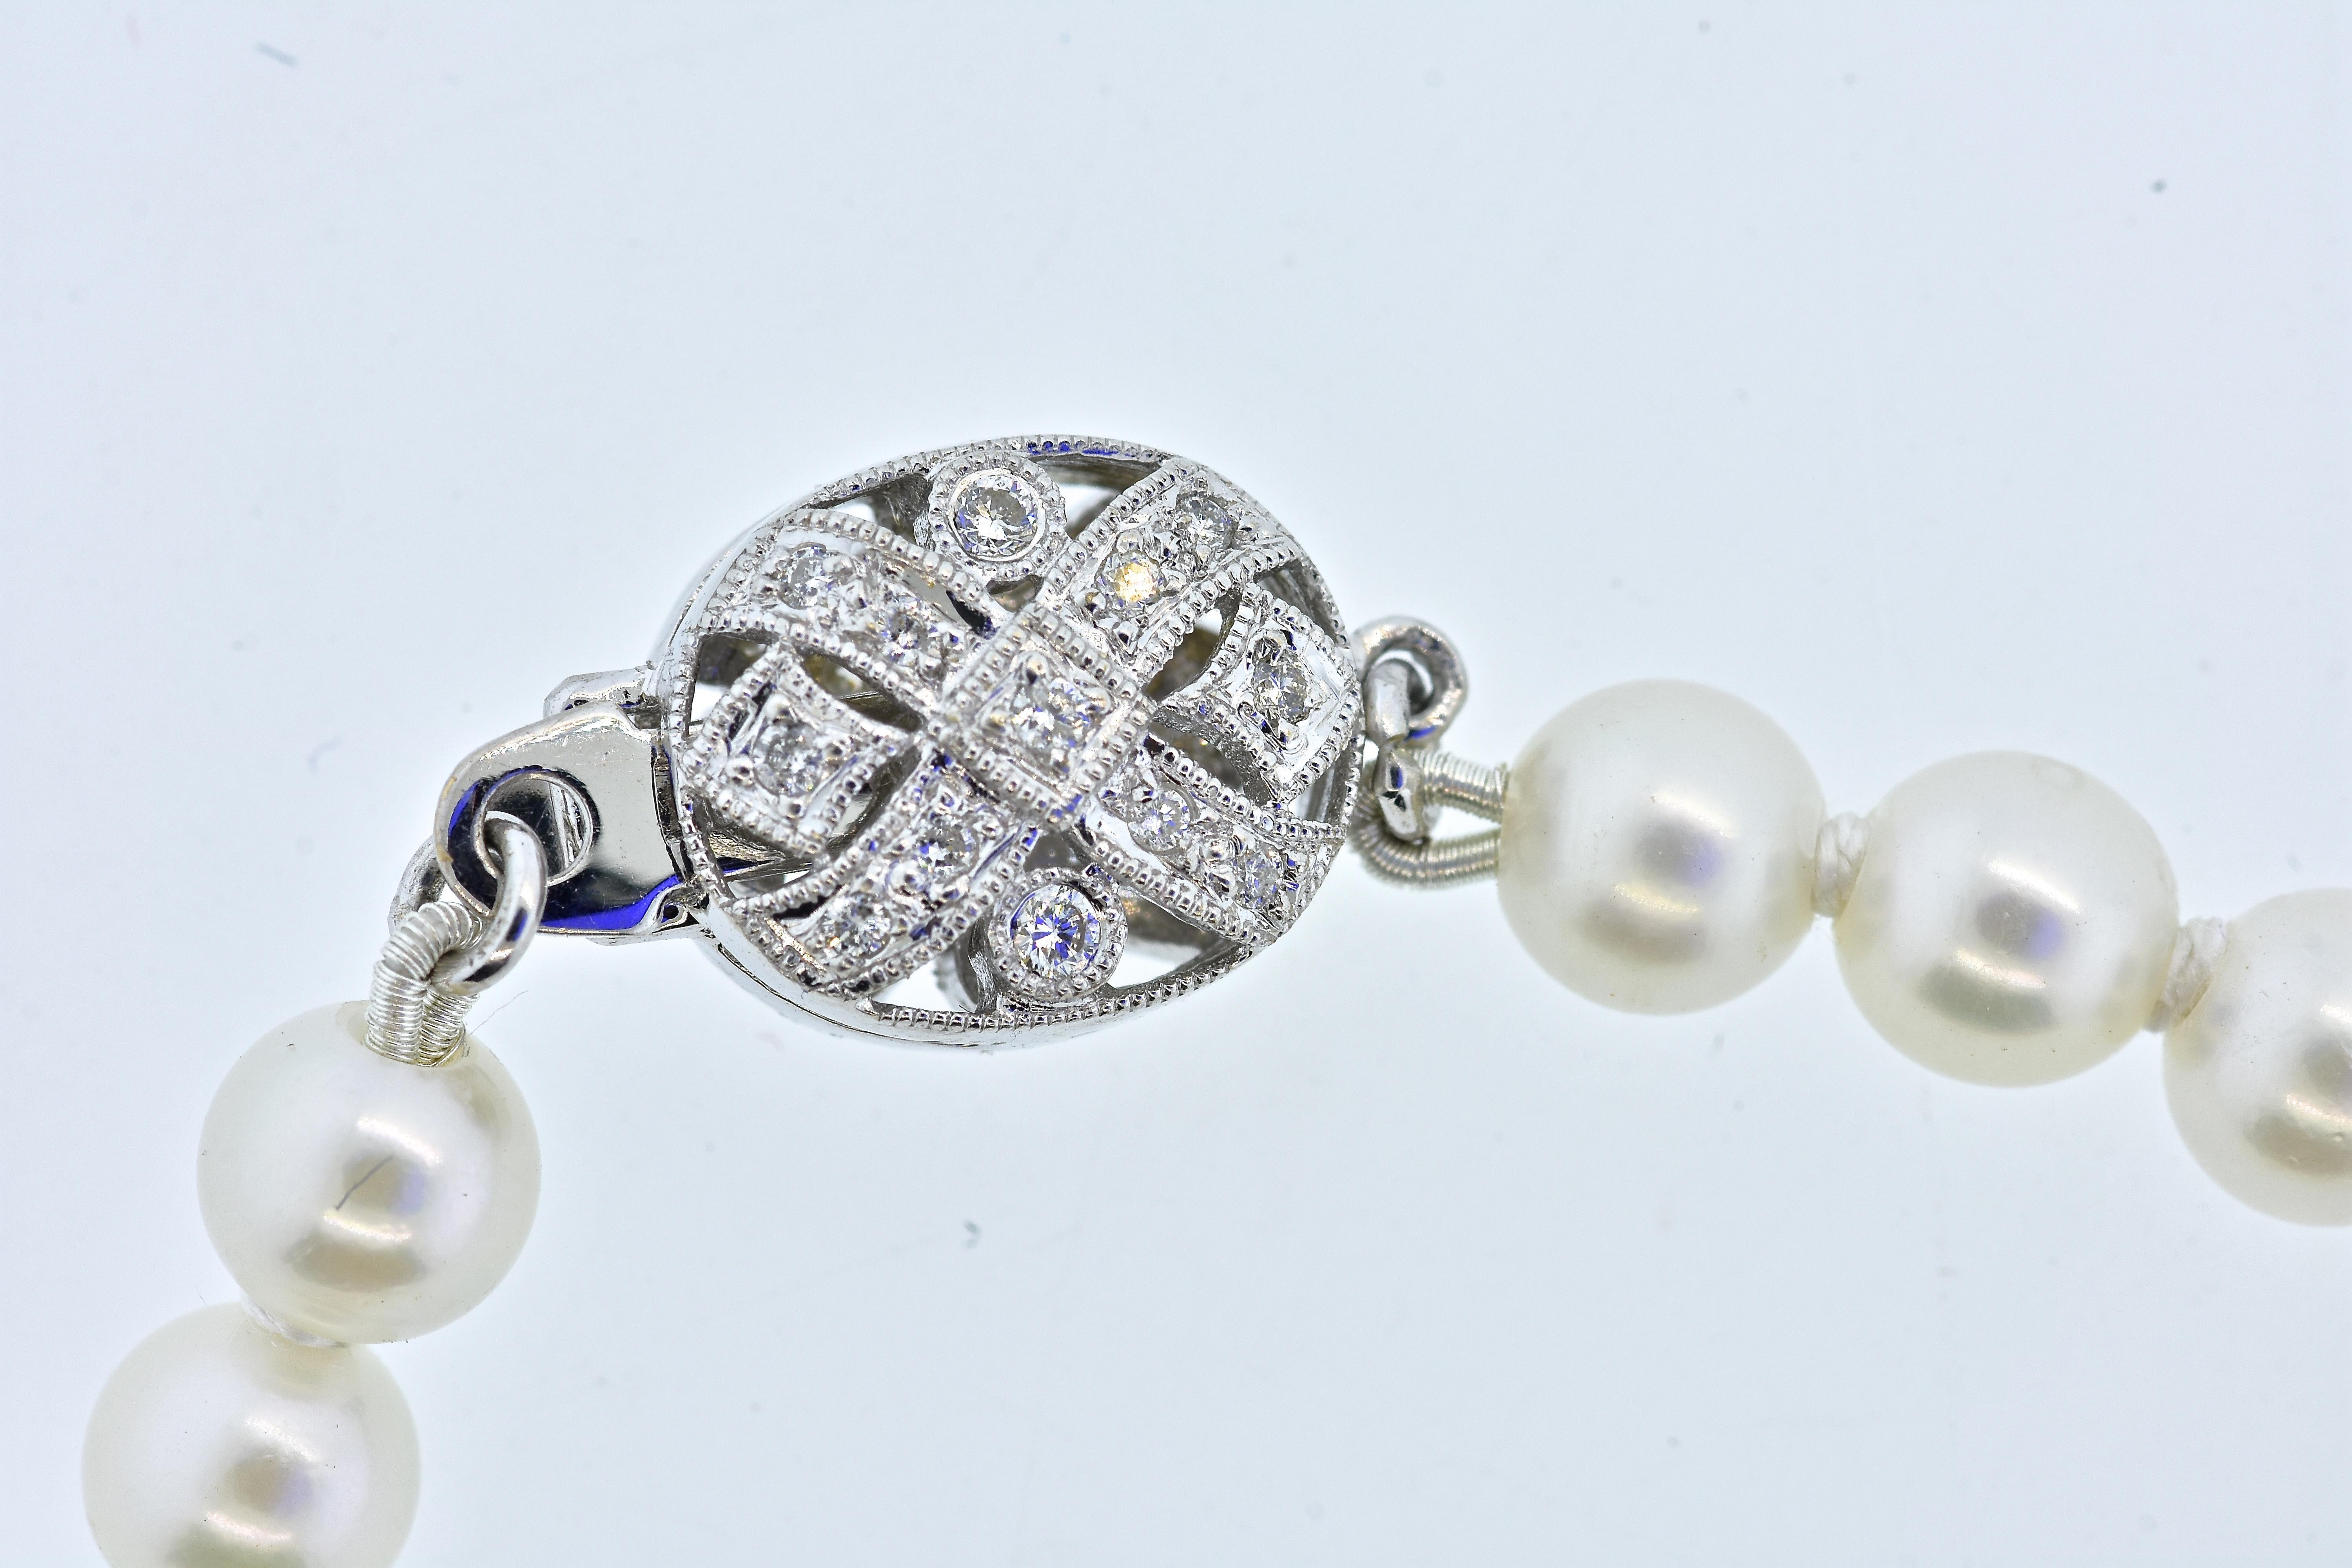 Diamond and white gold clasp which has diamonds on both sides of the clasp - so one never cares if it happens to turn as you move.  The pearls are very fine - white, smooth surfaces, and round, they are all luminous and reflect the light well